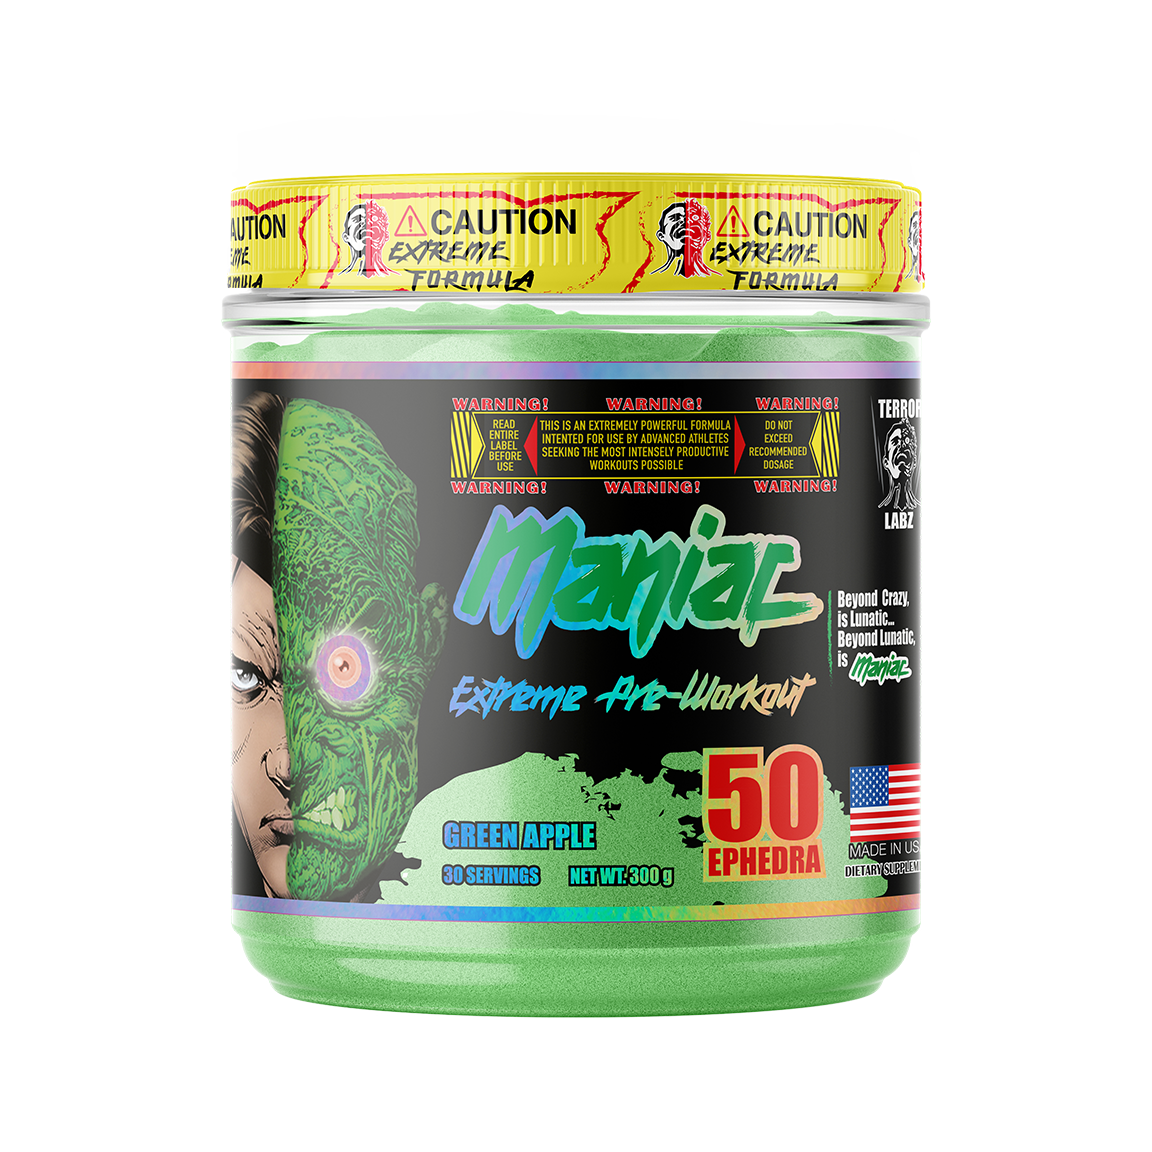 MANIAC, High Stim Pre Workout for Energy, Focus and Intensity and Thermogenic Fat Burner